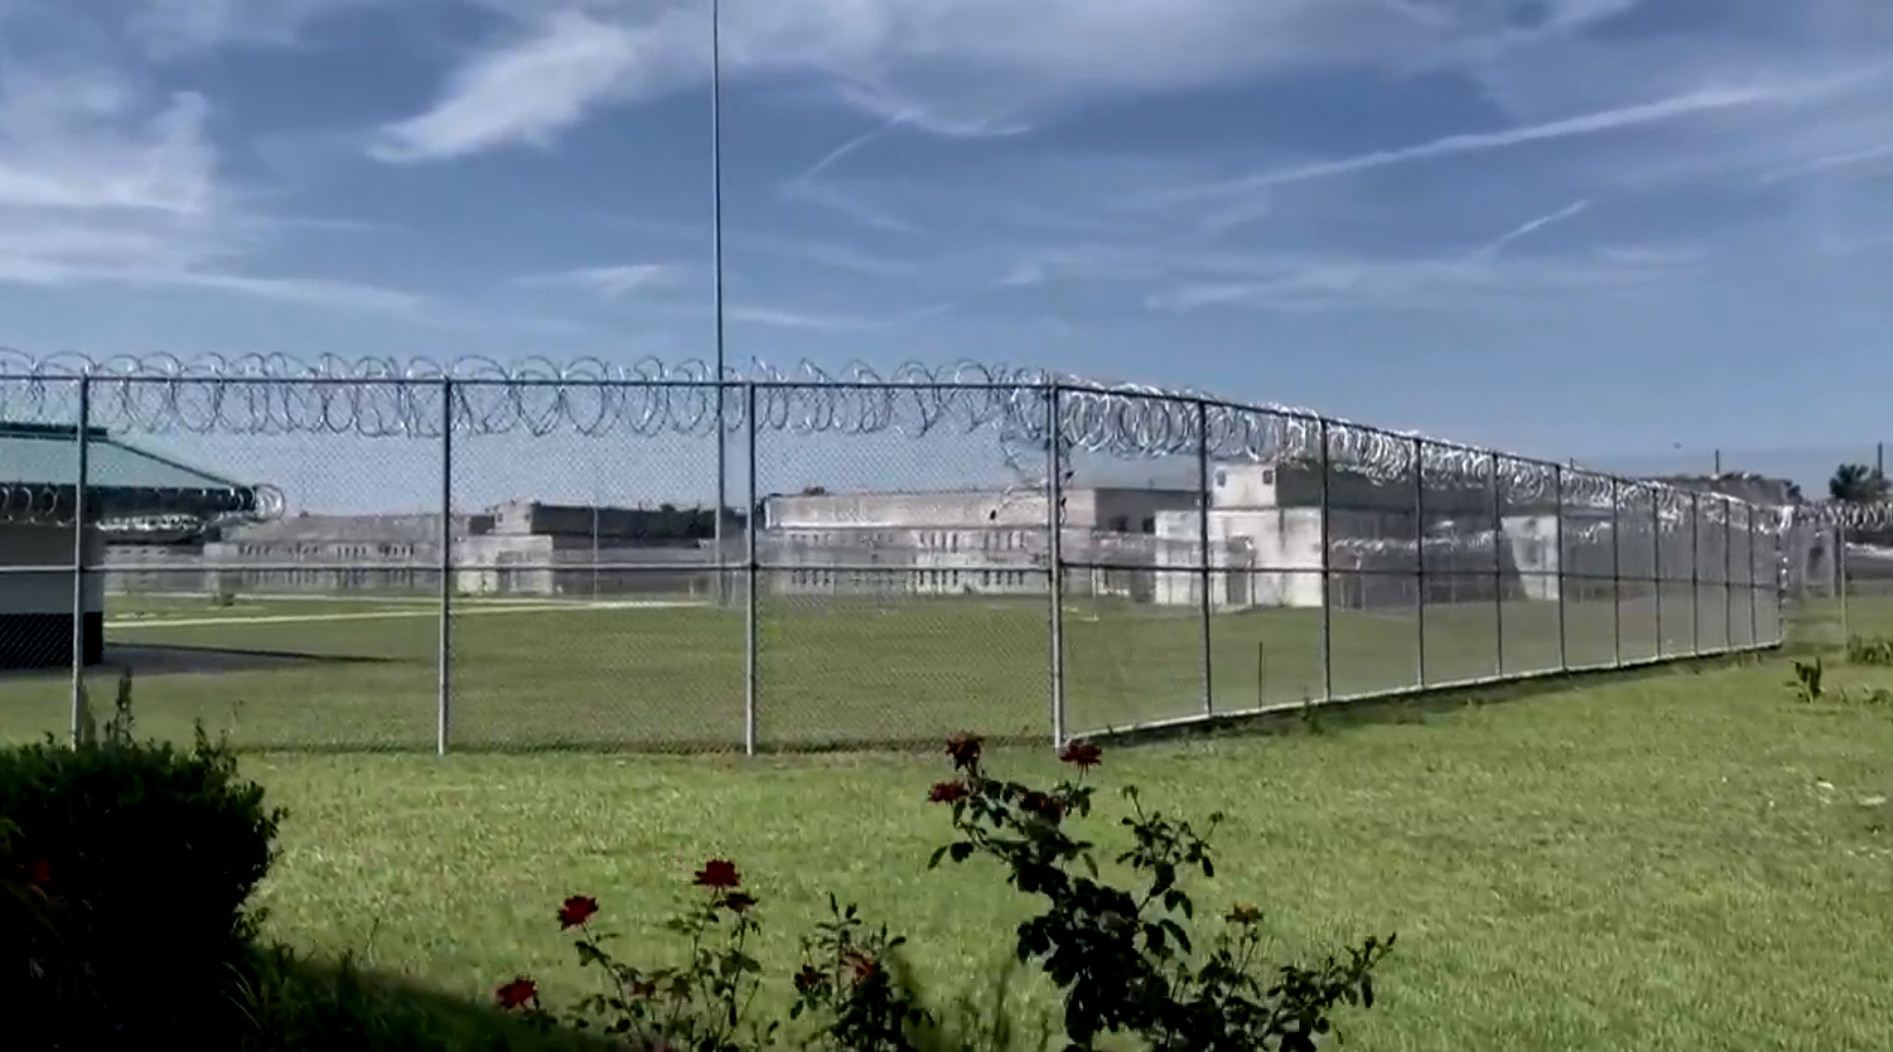 Second trial on Lee Correctional riot set to begin